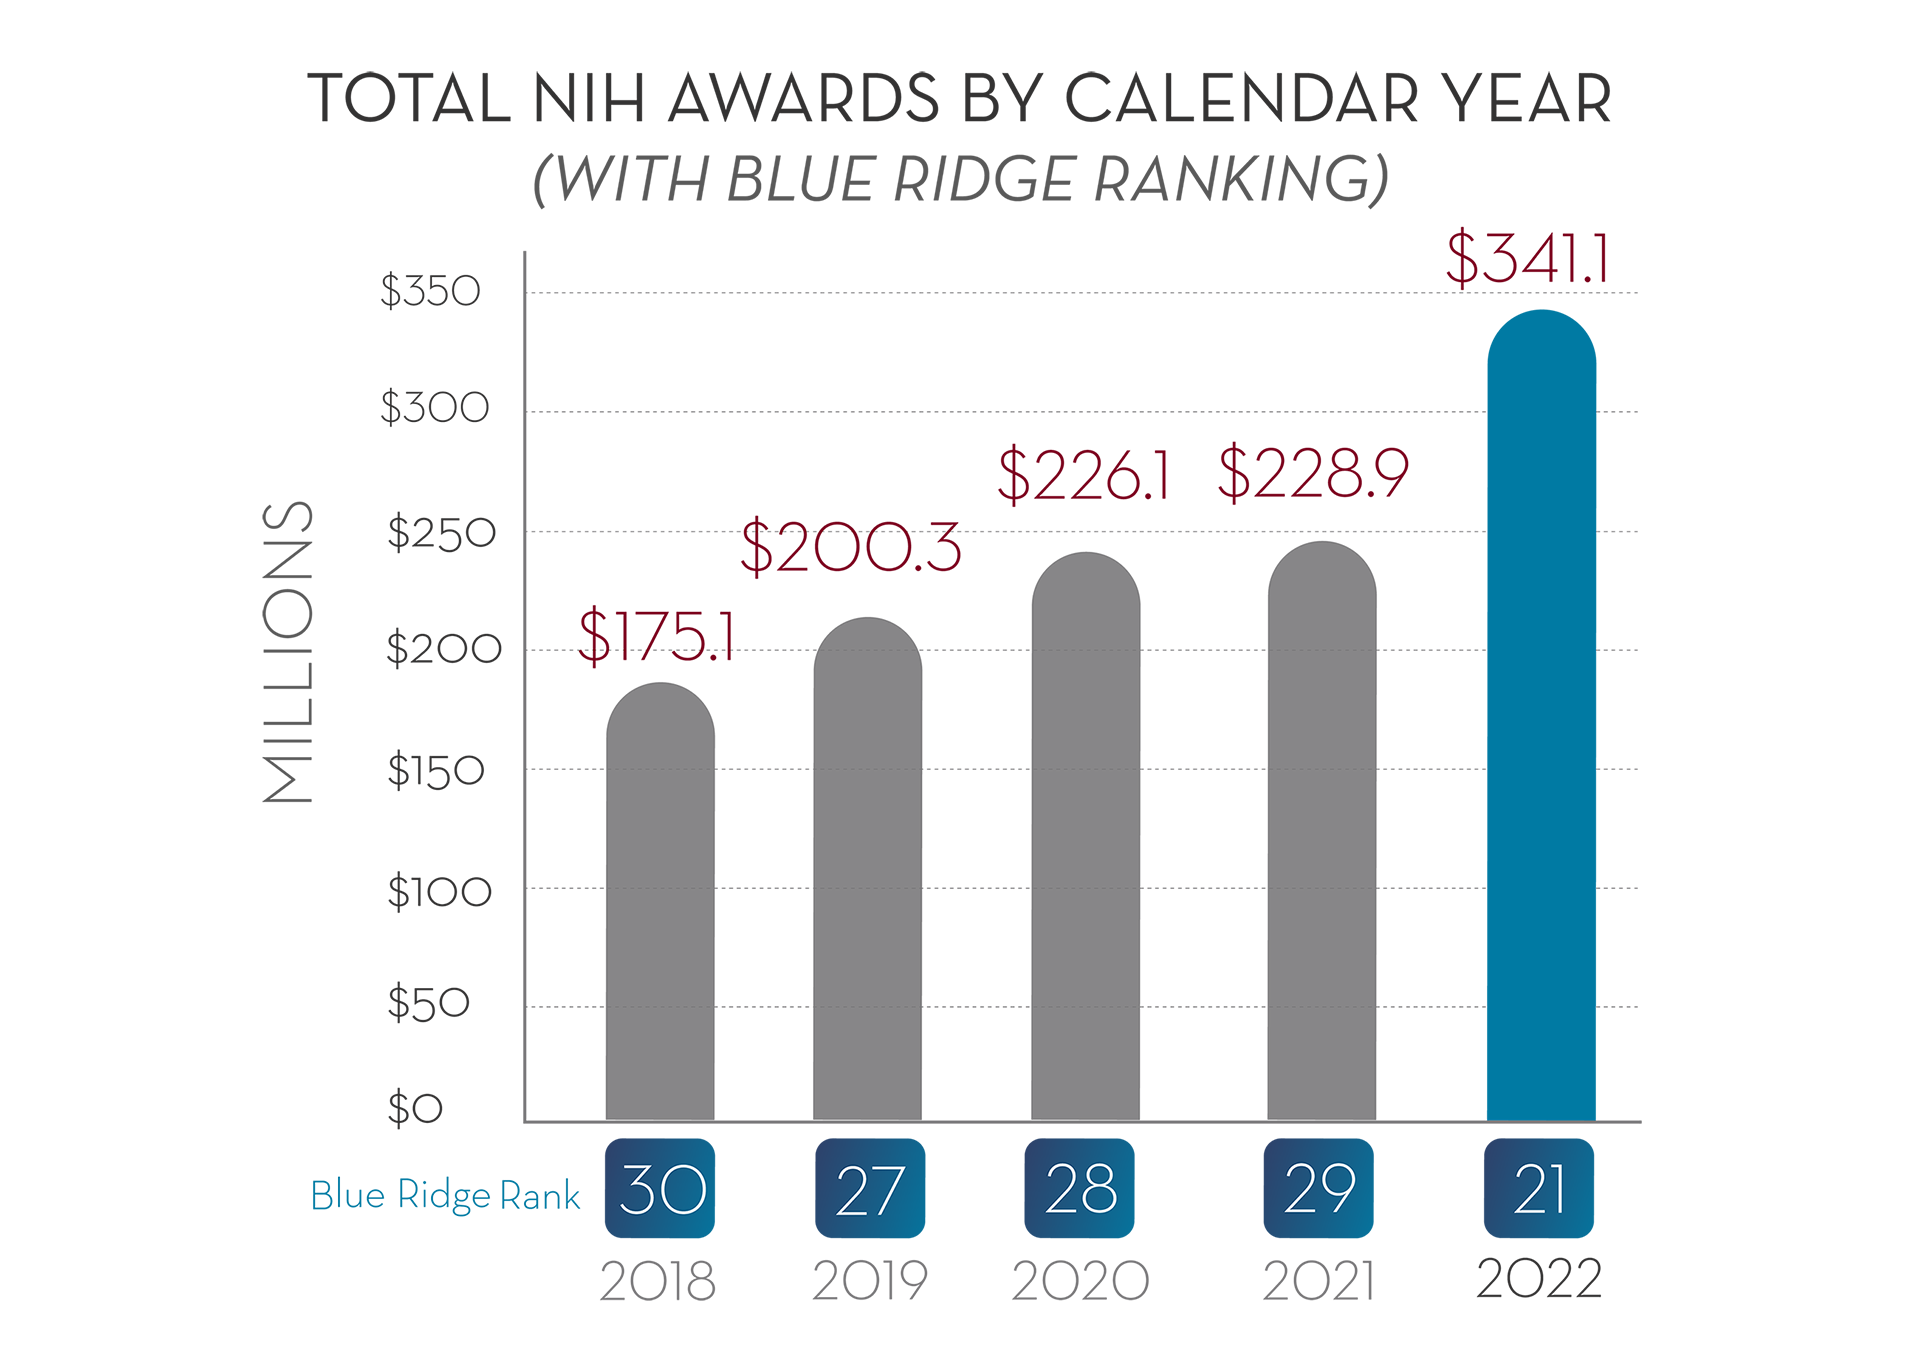 NIH awards by Year